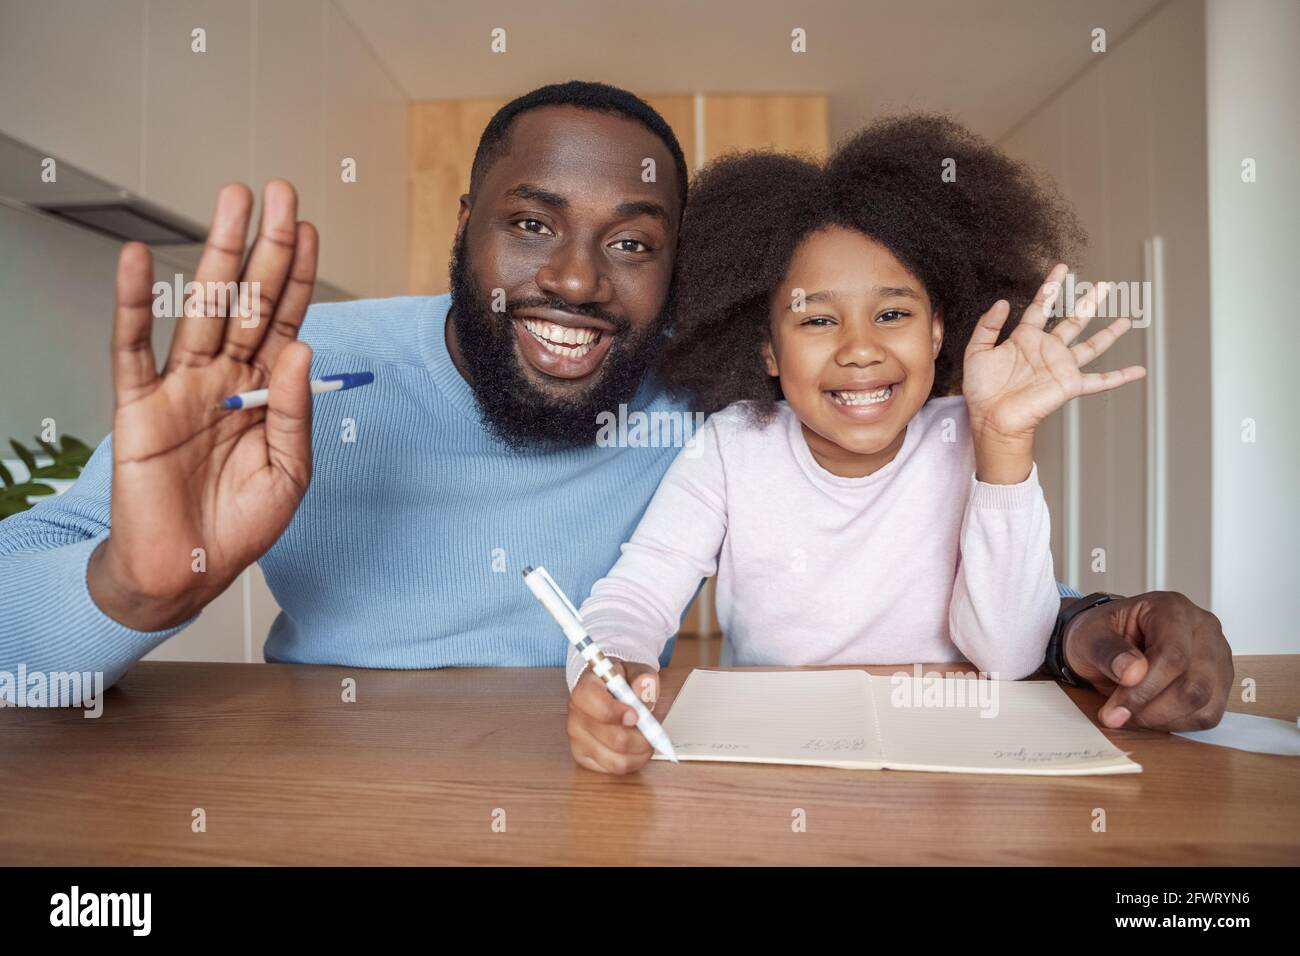 Father and daughter african amercian family smiling waving hand to camera Stock Photo